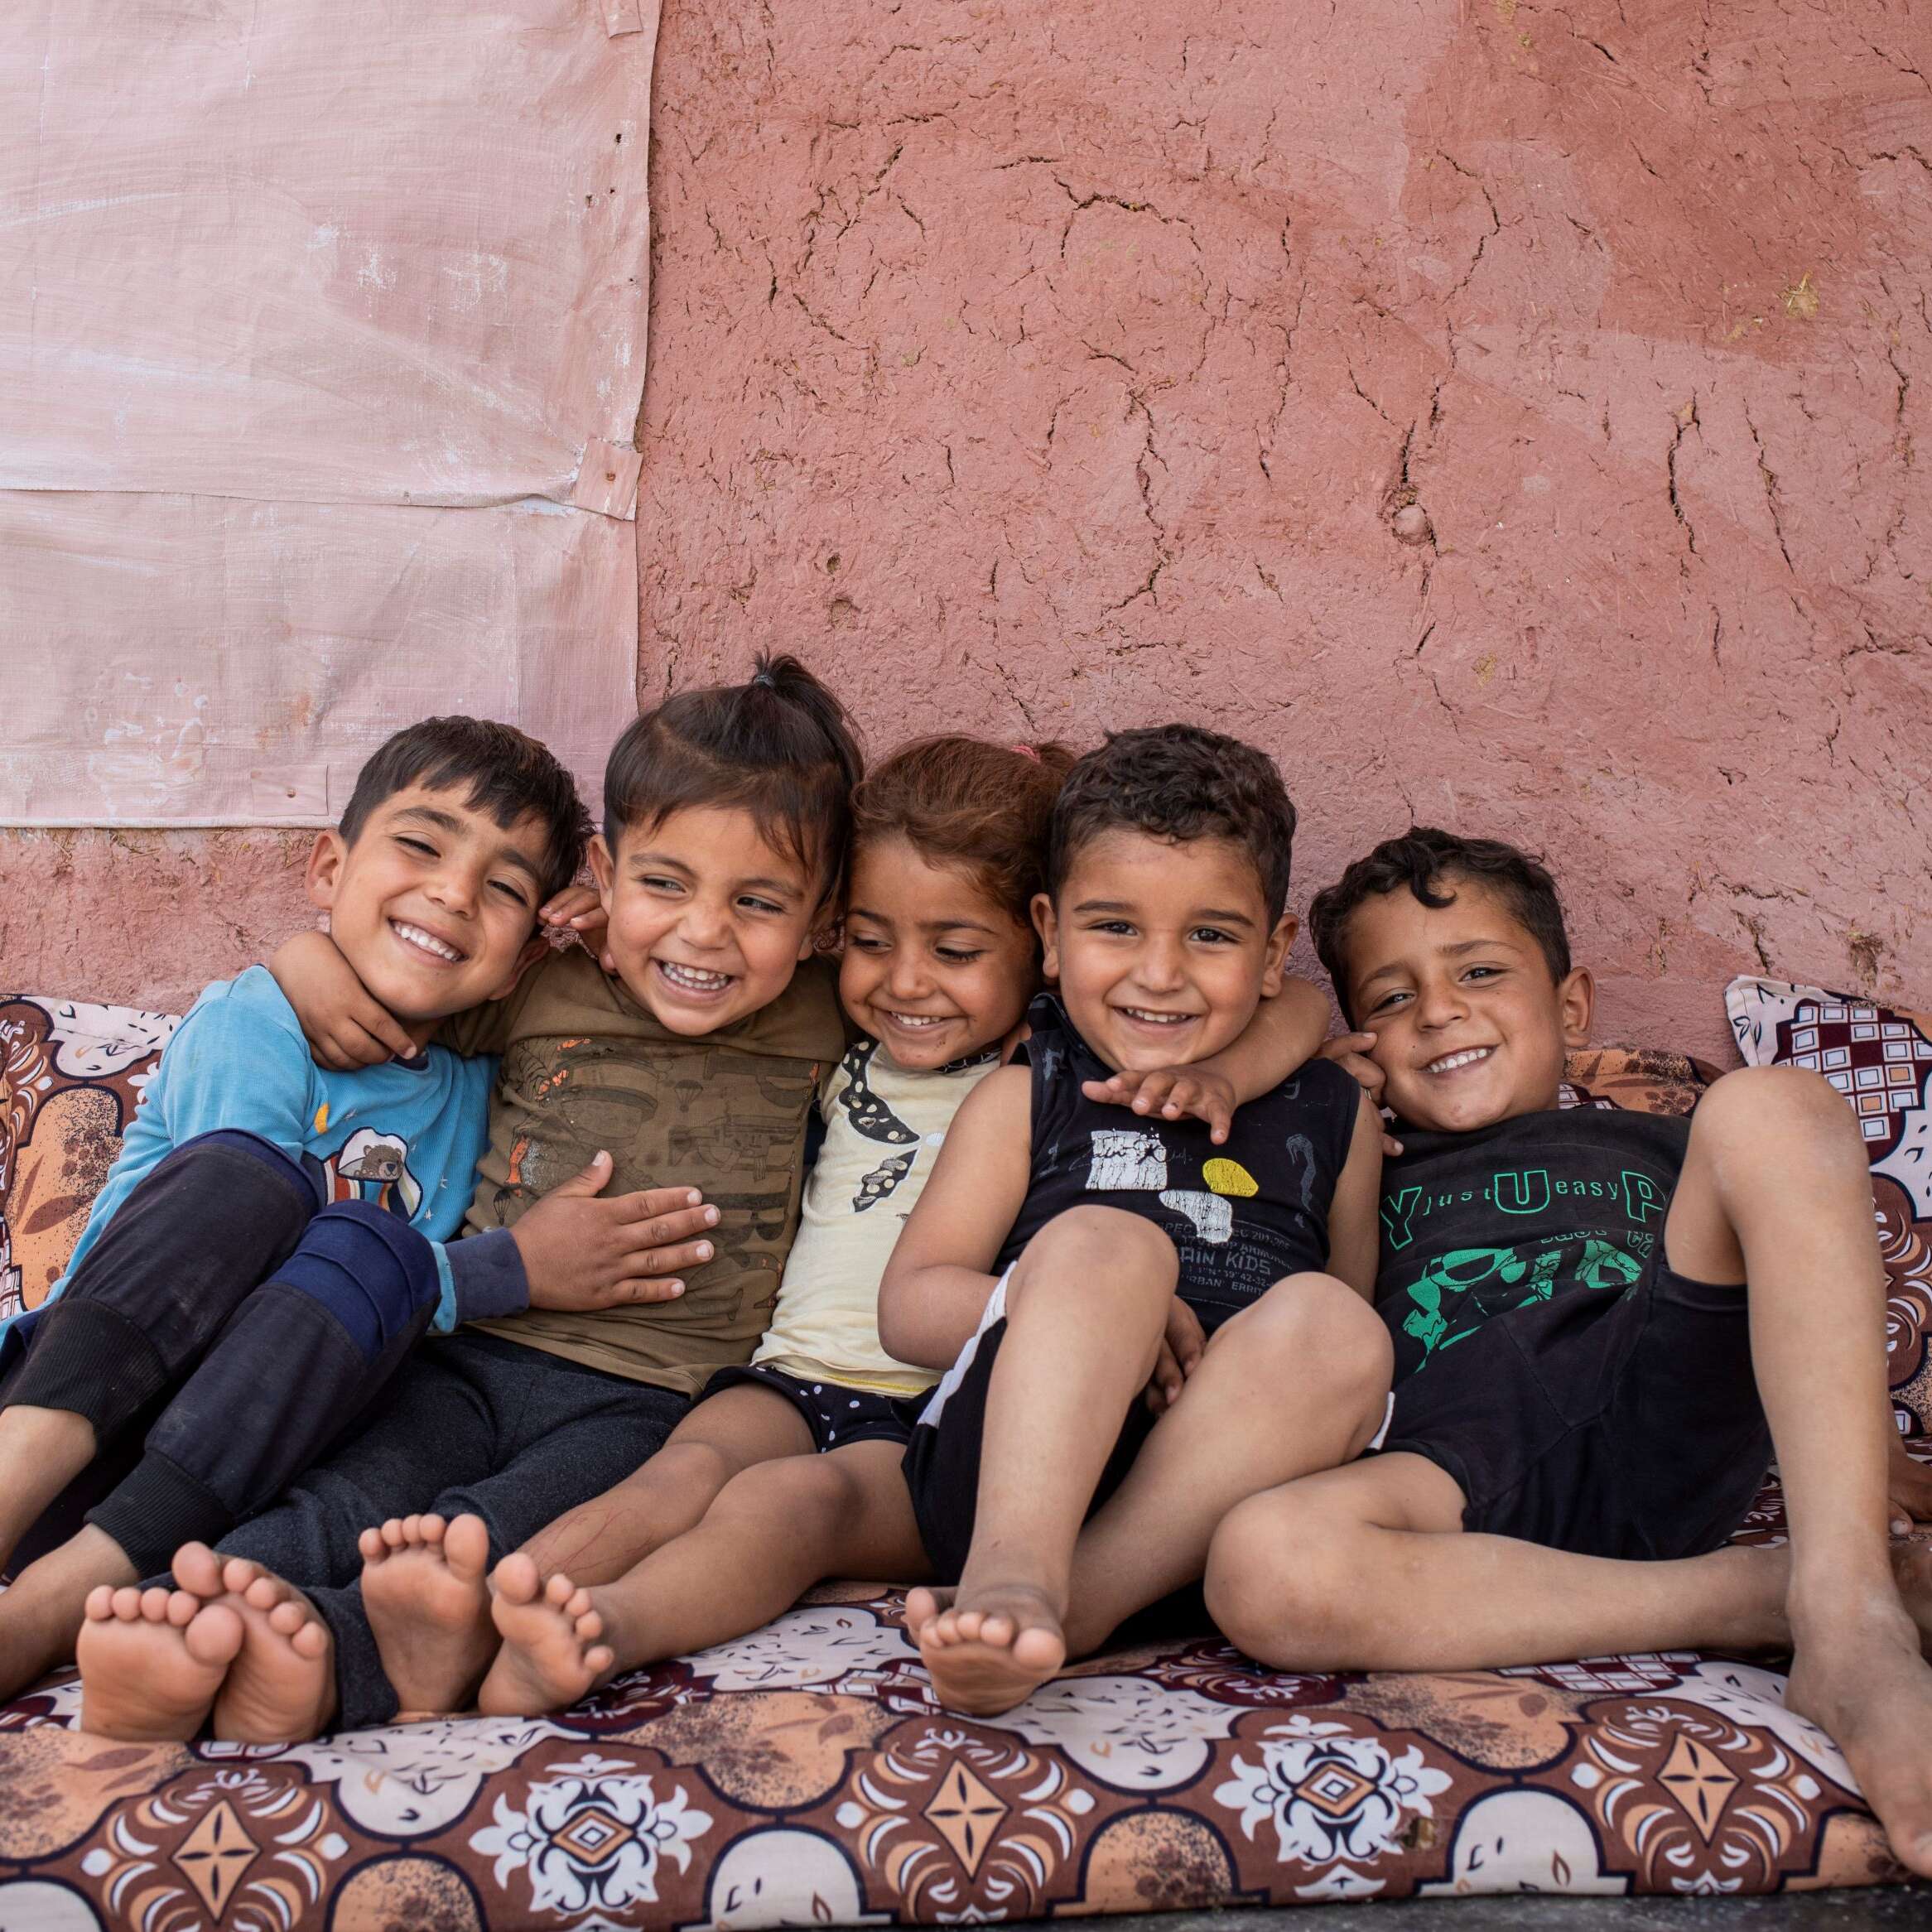 5 children from displaced families sit together in Sere Kaniye Camp in North-East Syria.